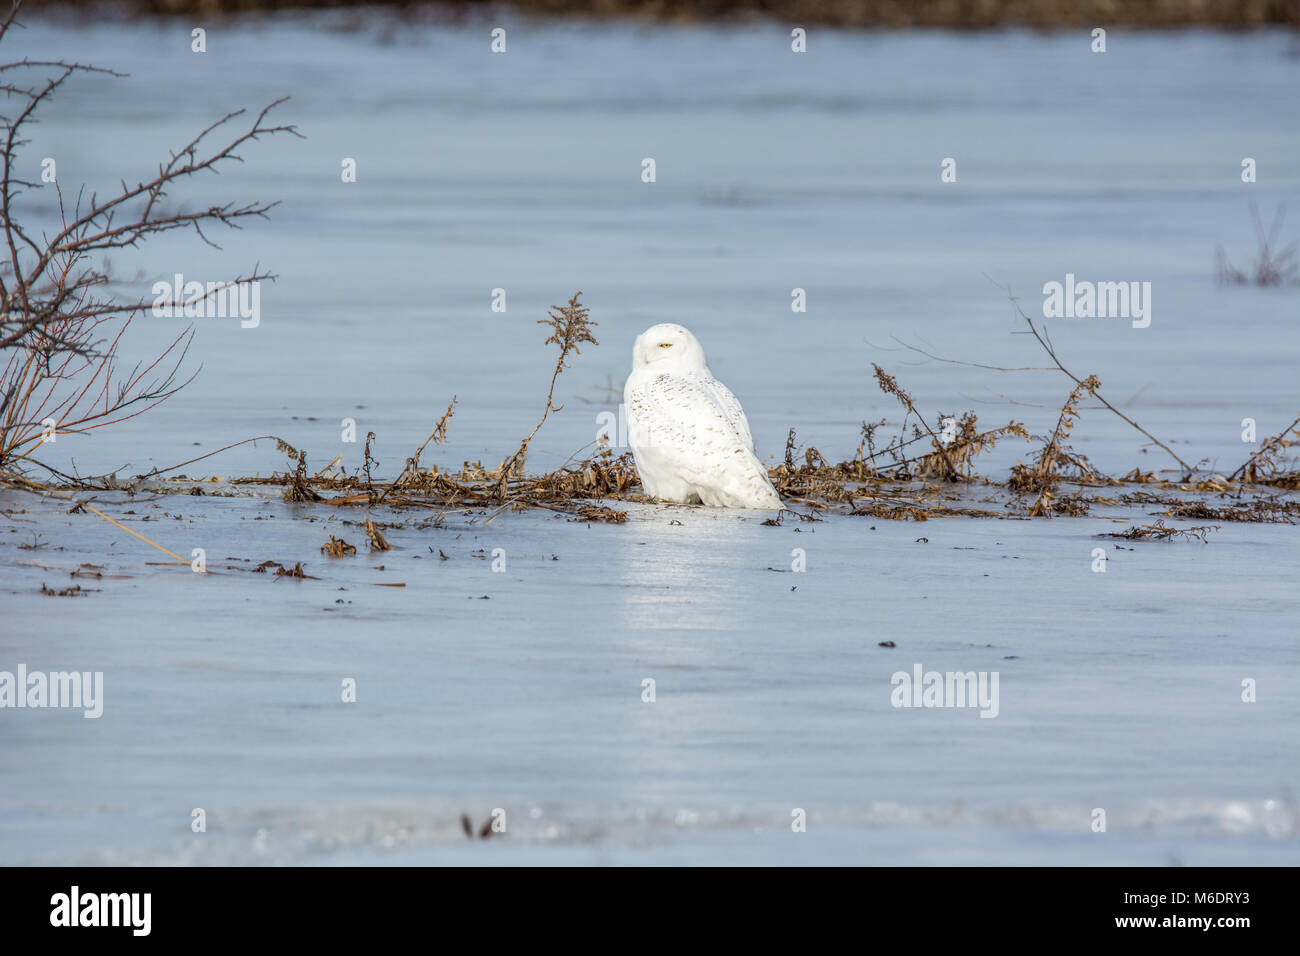 Snowy Owl Sitting On A Fence Post Stock Photo